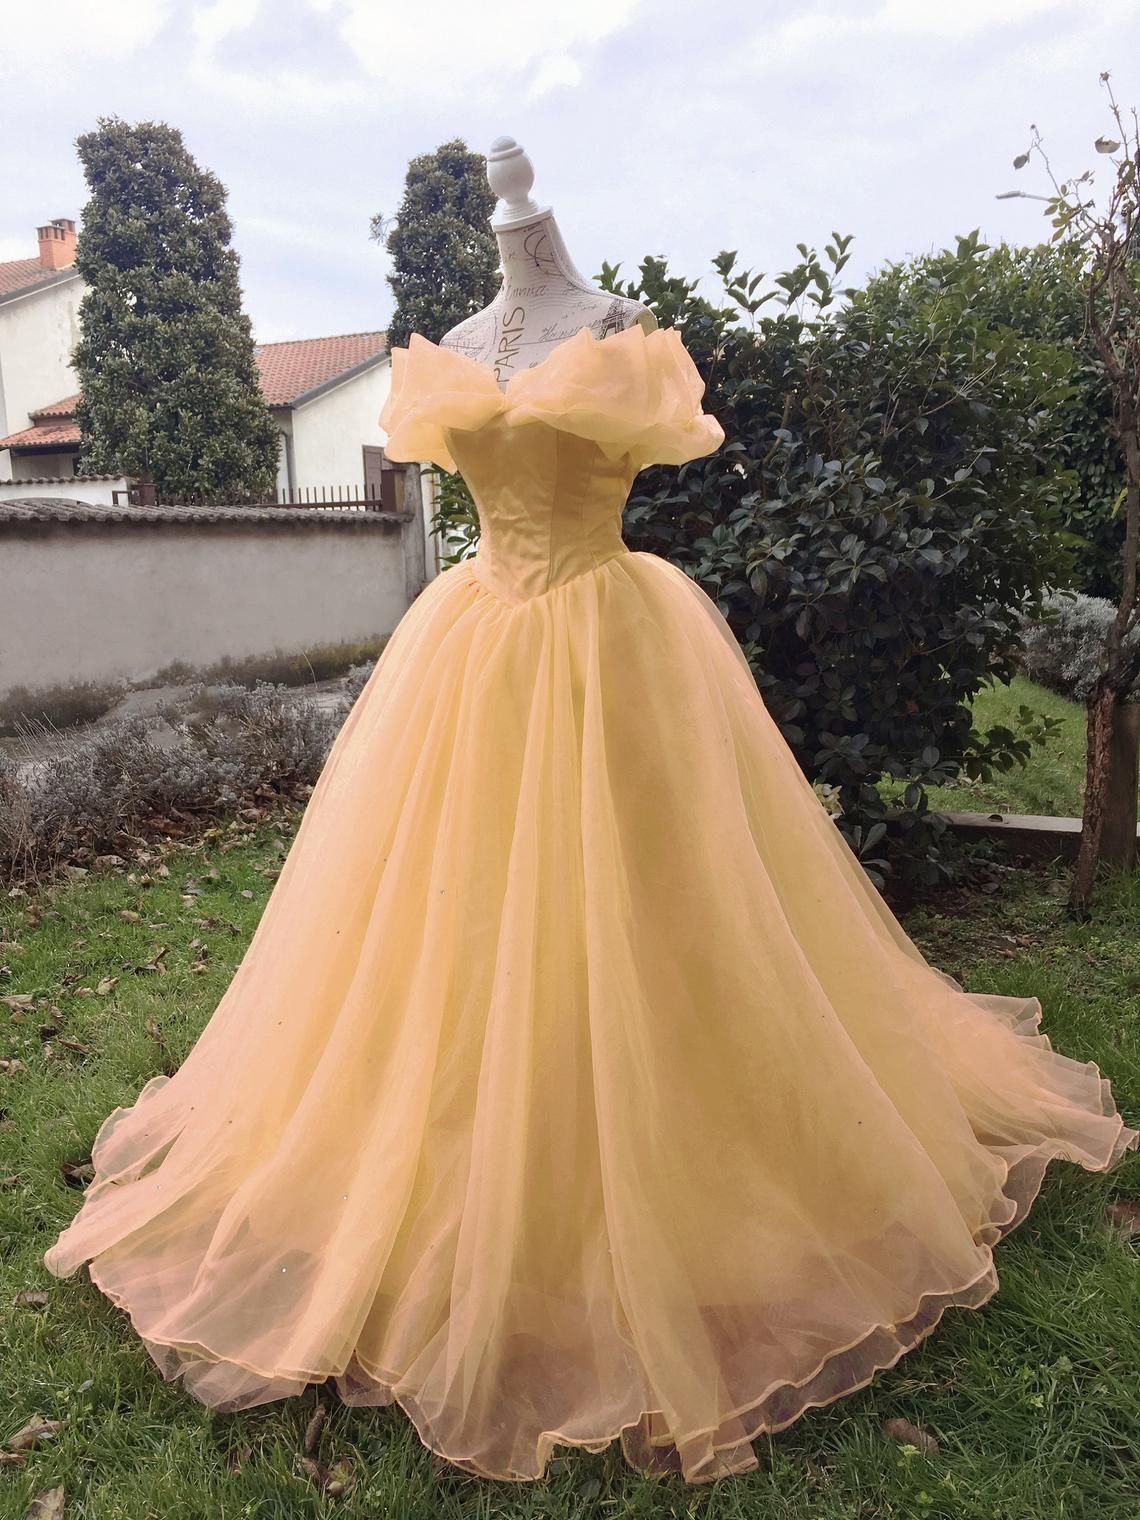 LTP0855,Off the shoulder prom dresses organza evening dresses gold yellow Cinderella princess ball gown a line formal gown